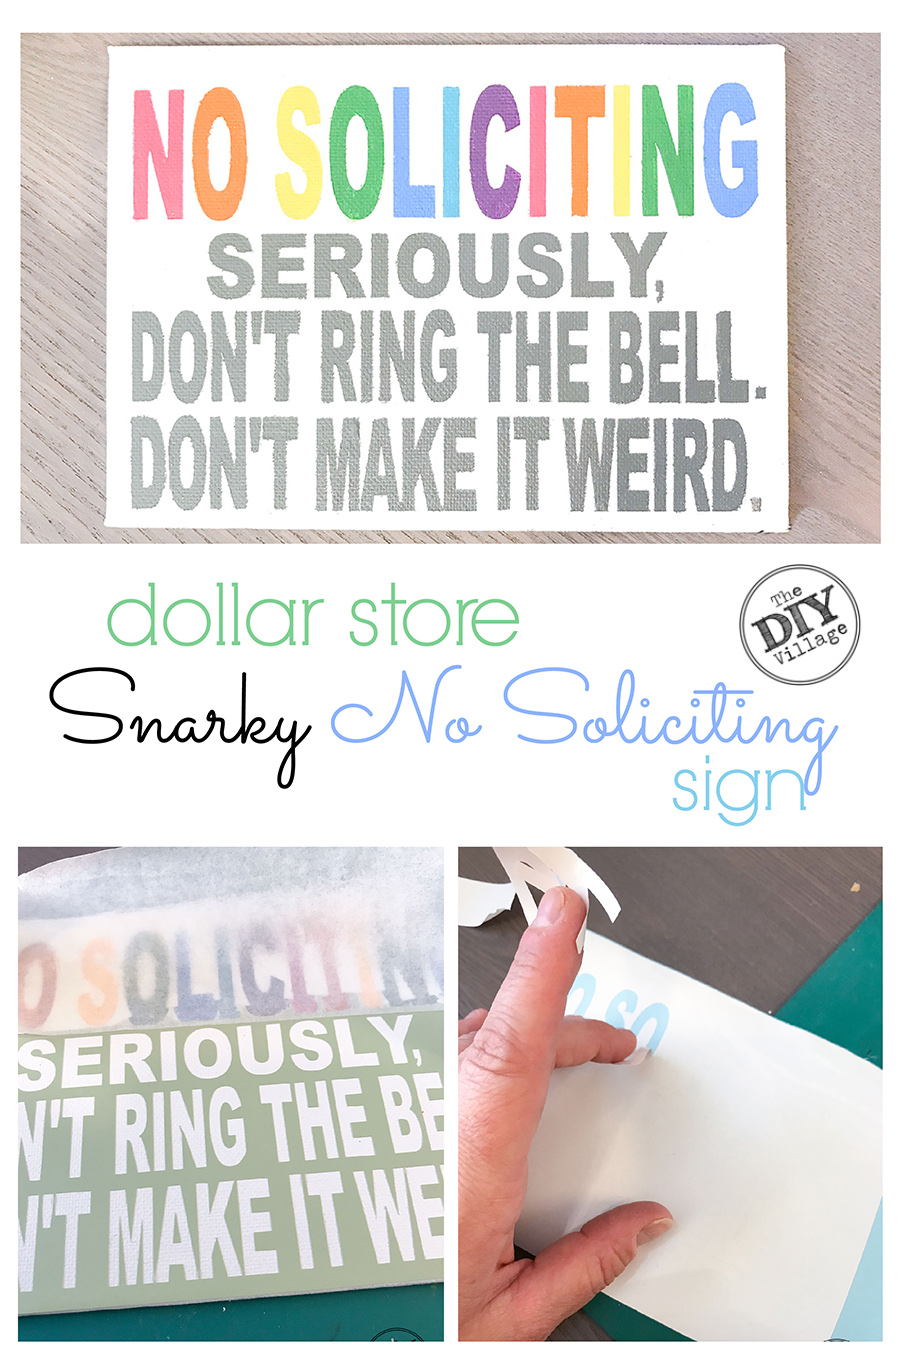 Rainbow colored words snarky No soliciting sign